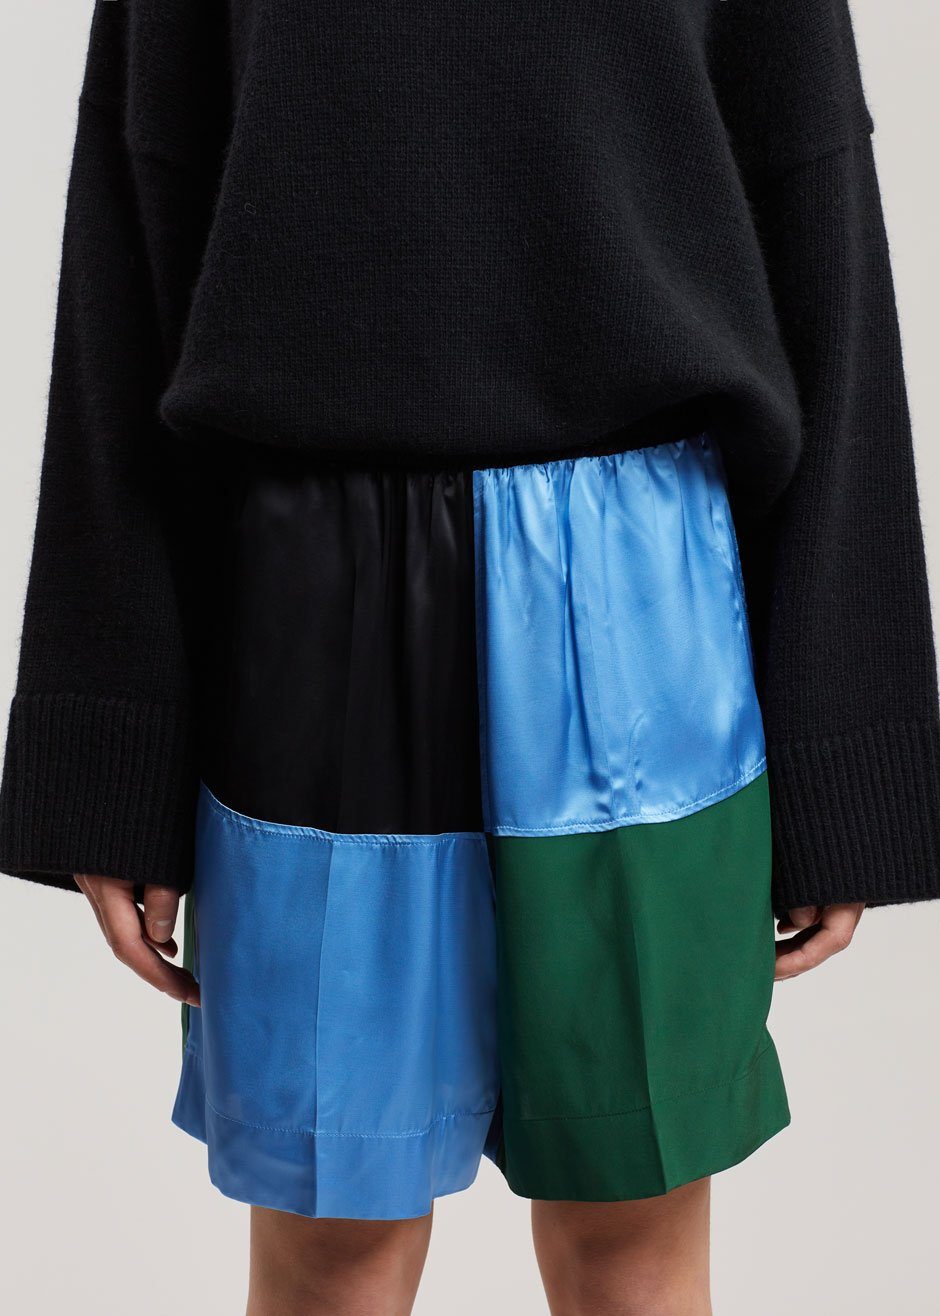 JW Anderson Panelled Boxing Shorts - Blue/Black